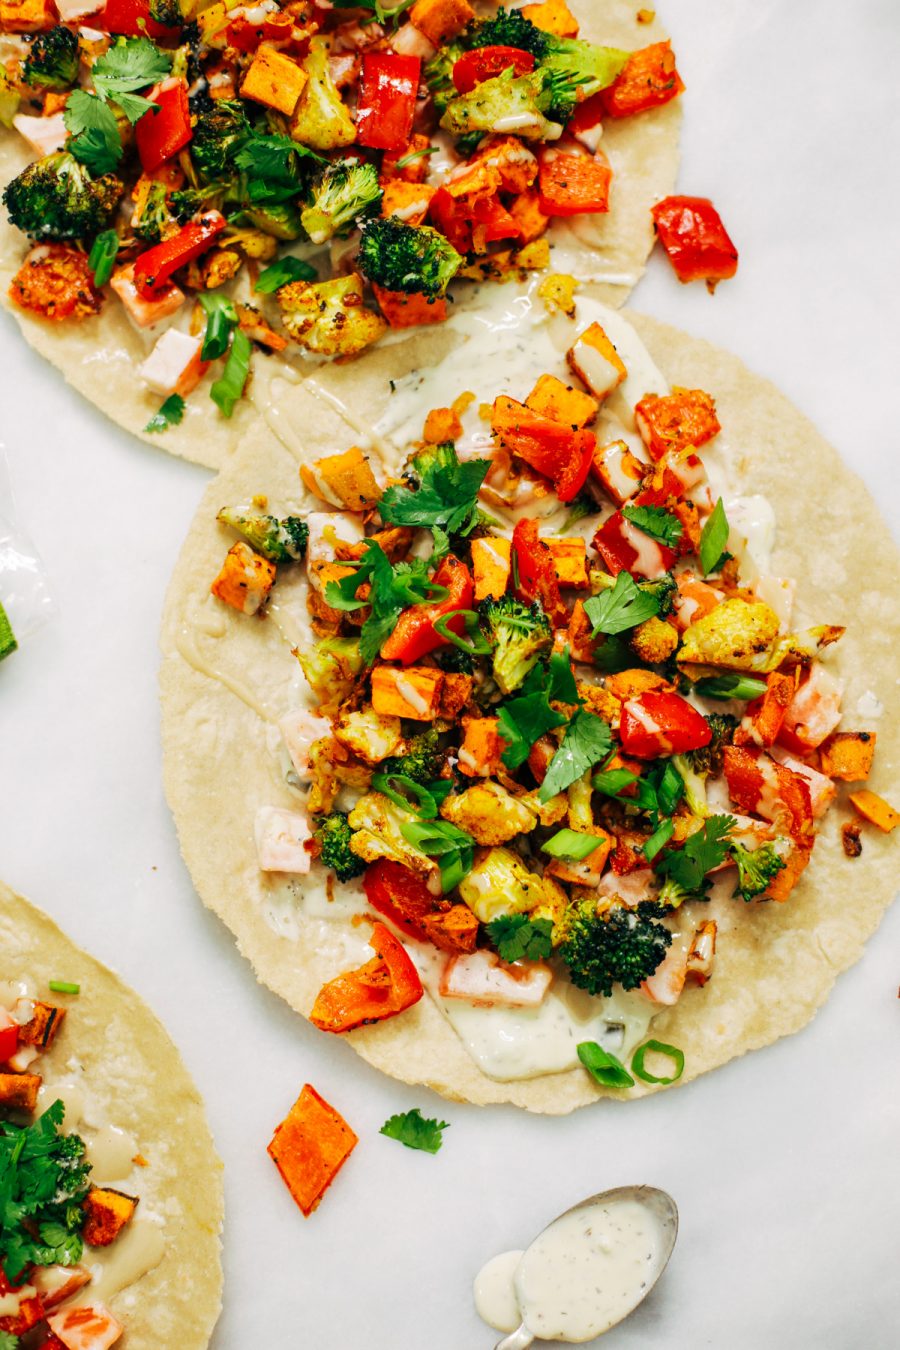 Curry Roasted Vegetable Wraps - Paleo Gluten Free